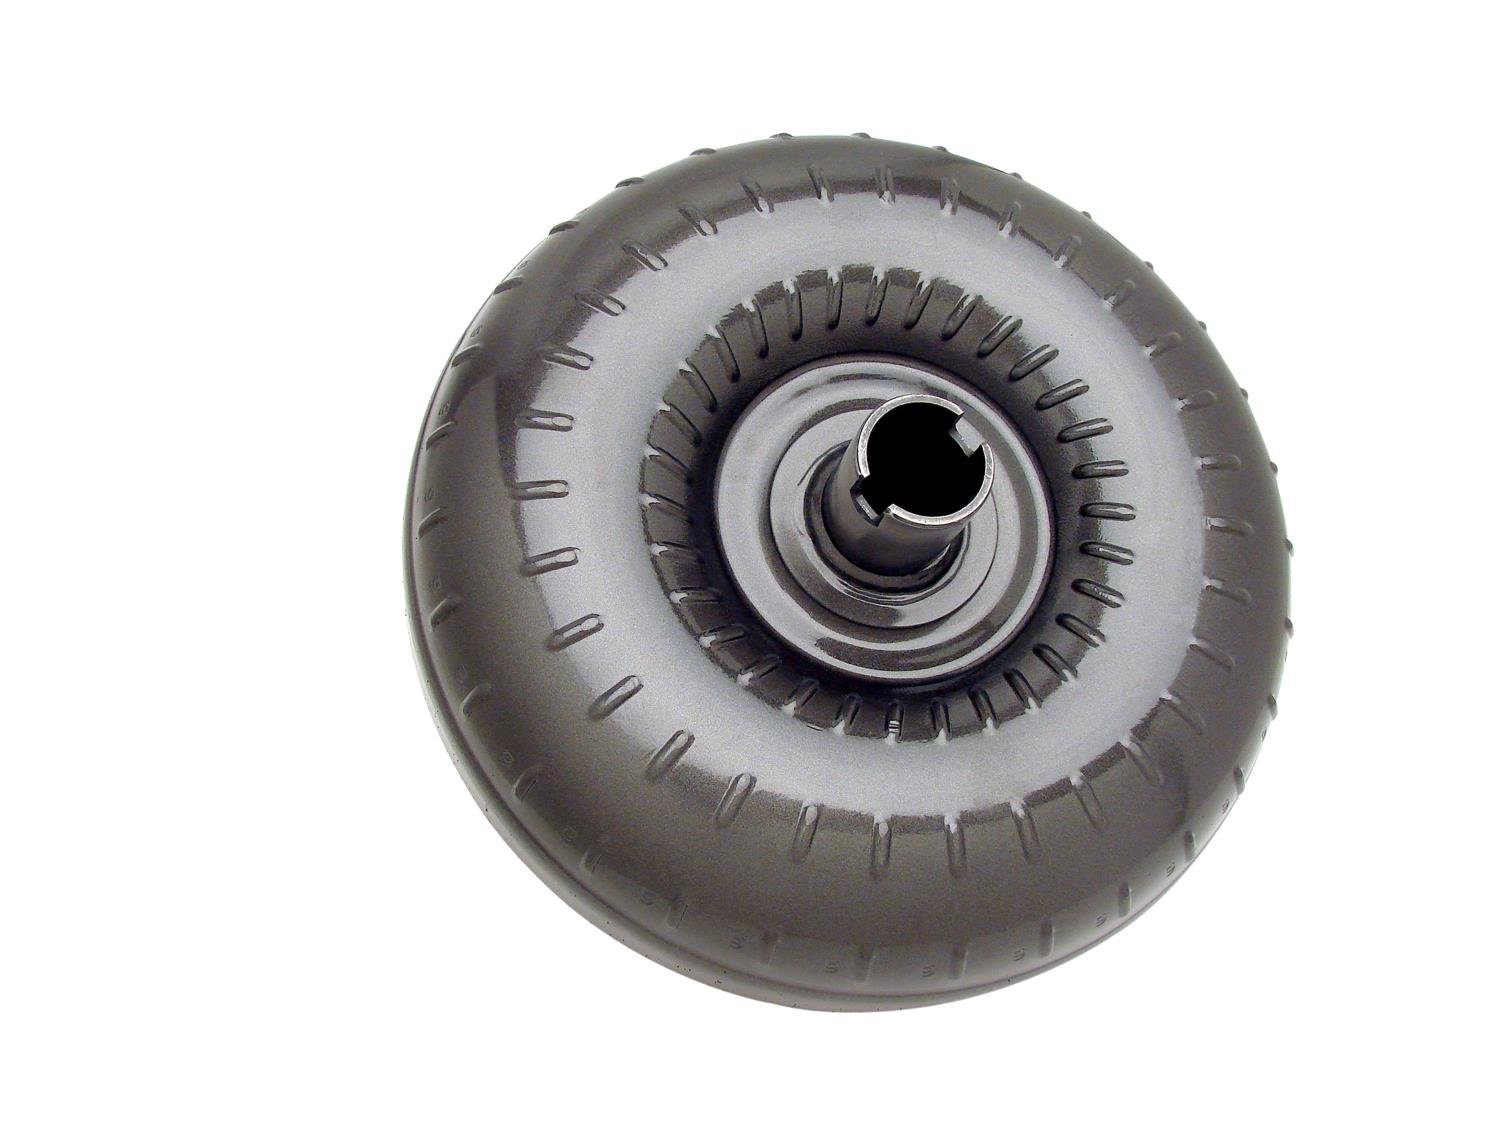 241500-A Saturday Night Special Torque Converter for 1965-1981 GM TH350/TH375